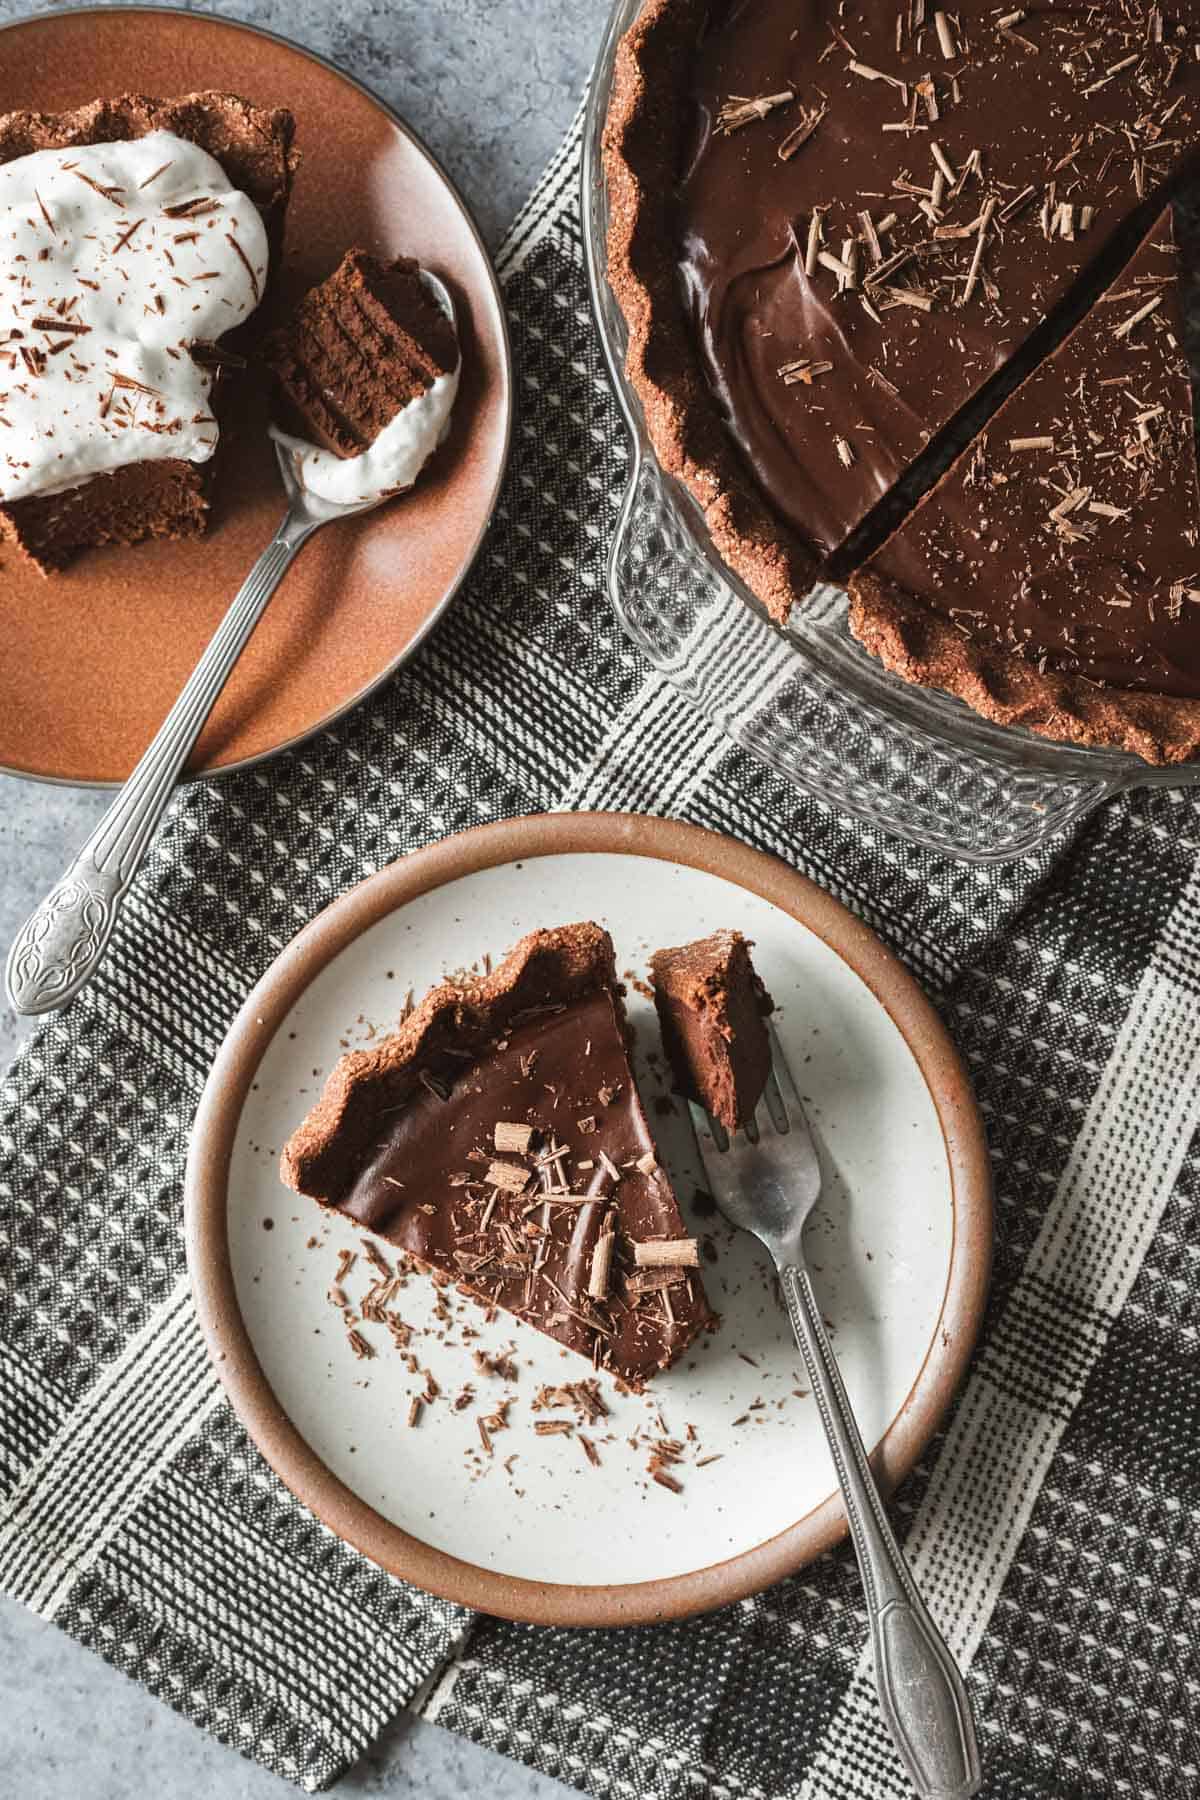 slice of chocolate pie topped with chocolate shavings on a plate.